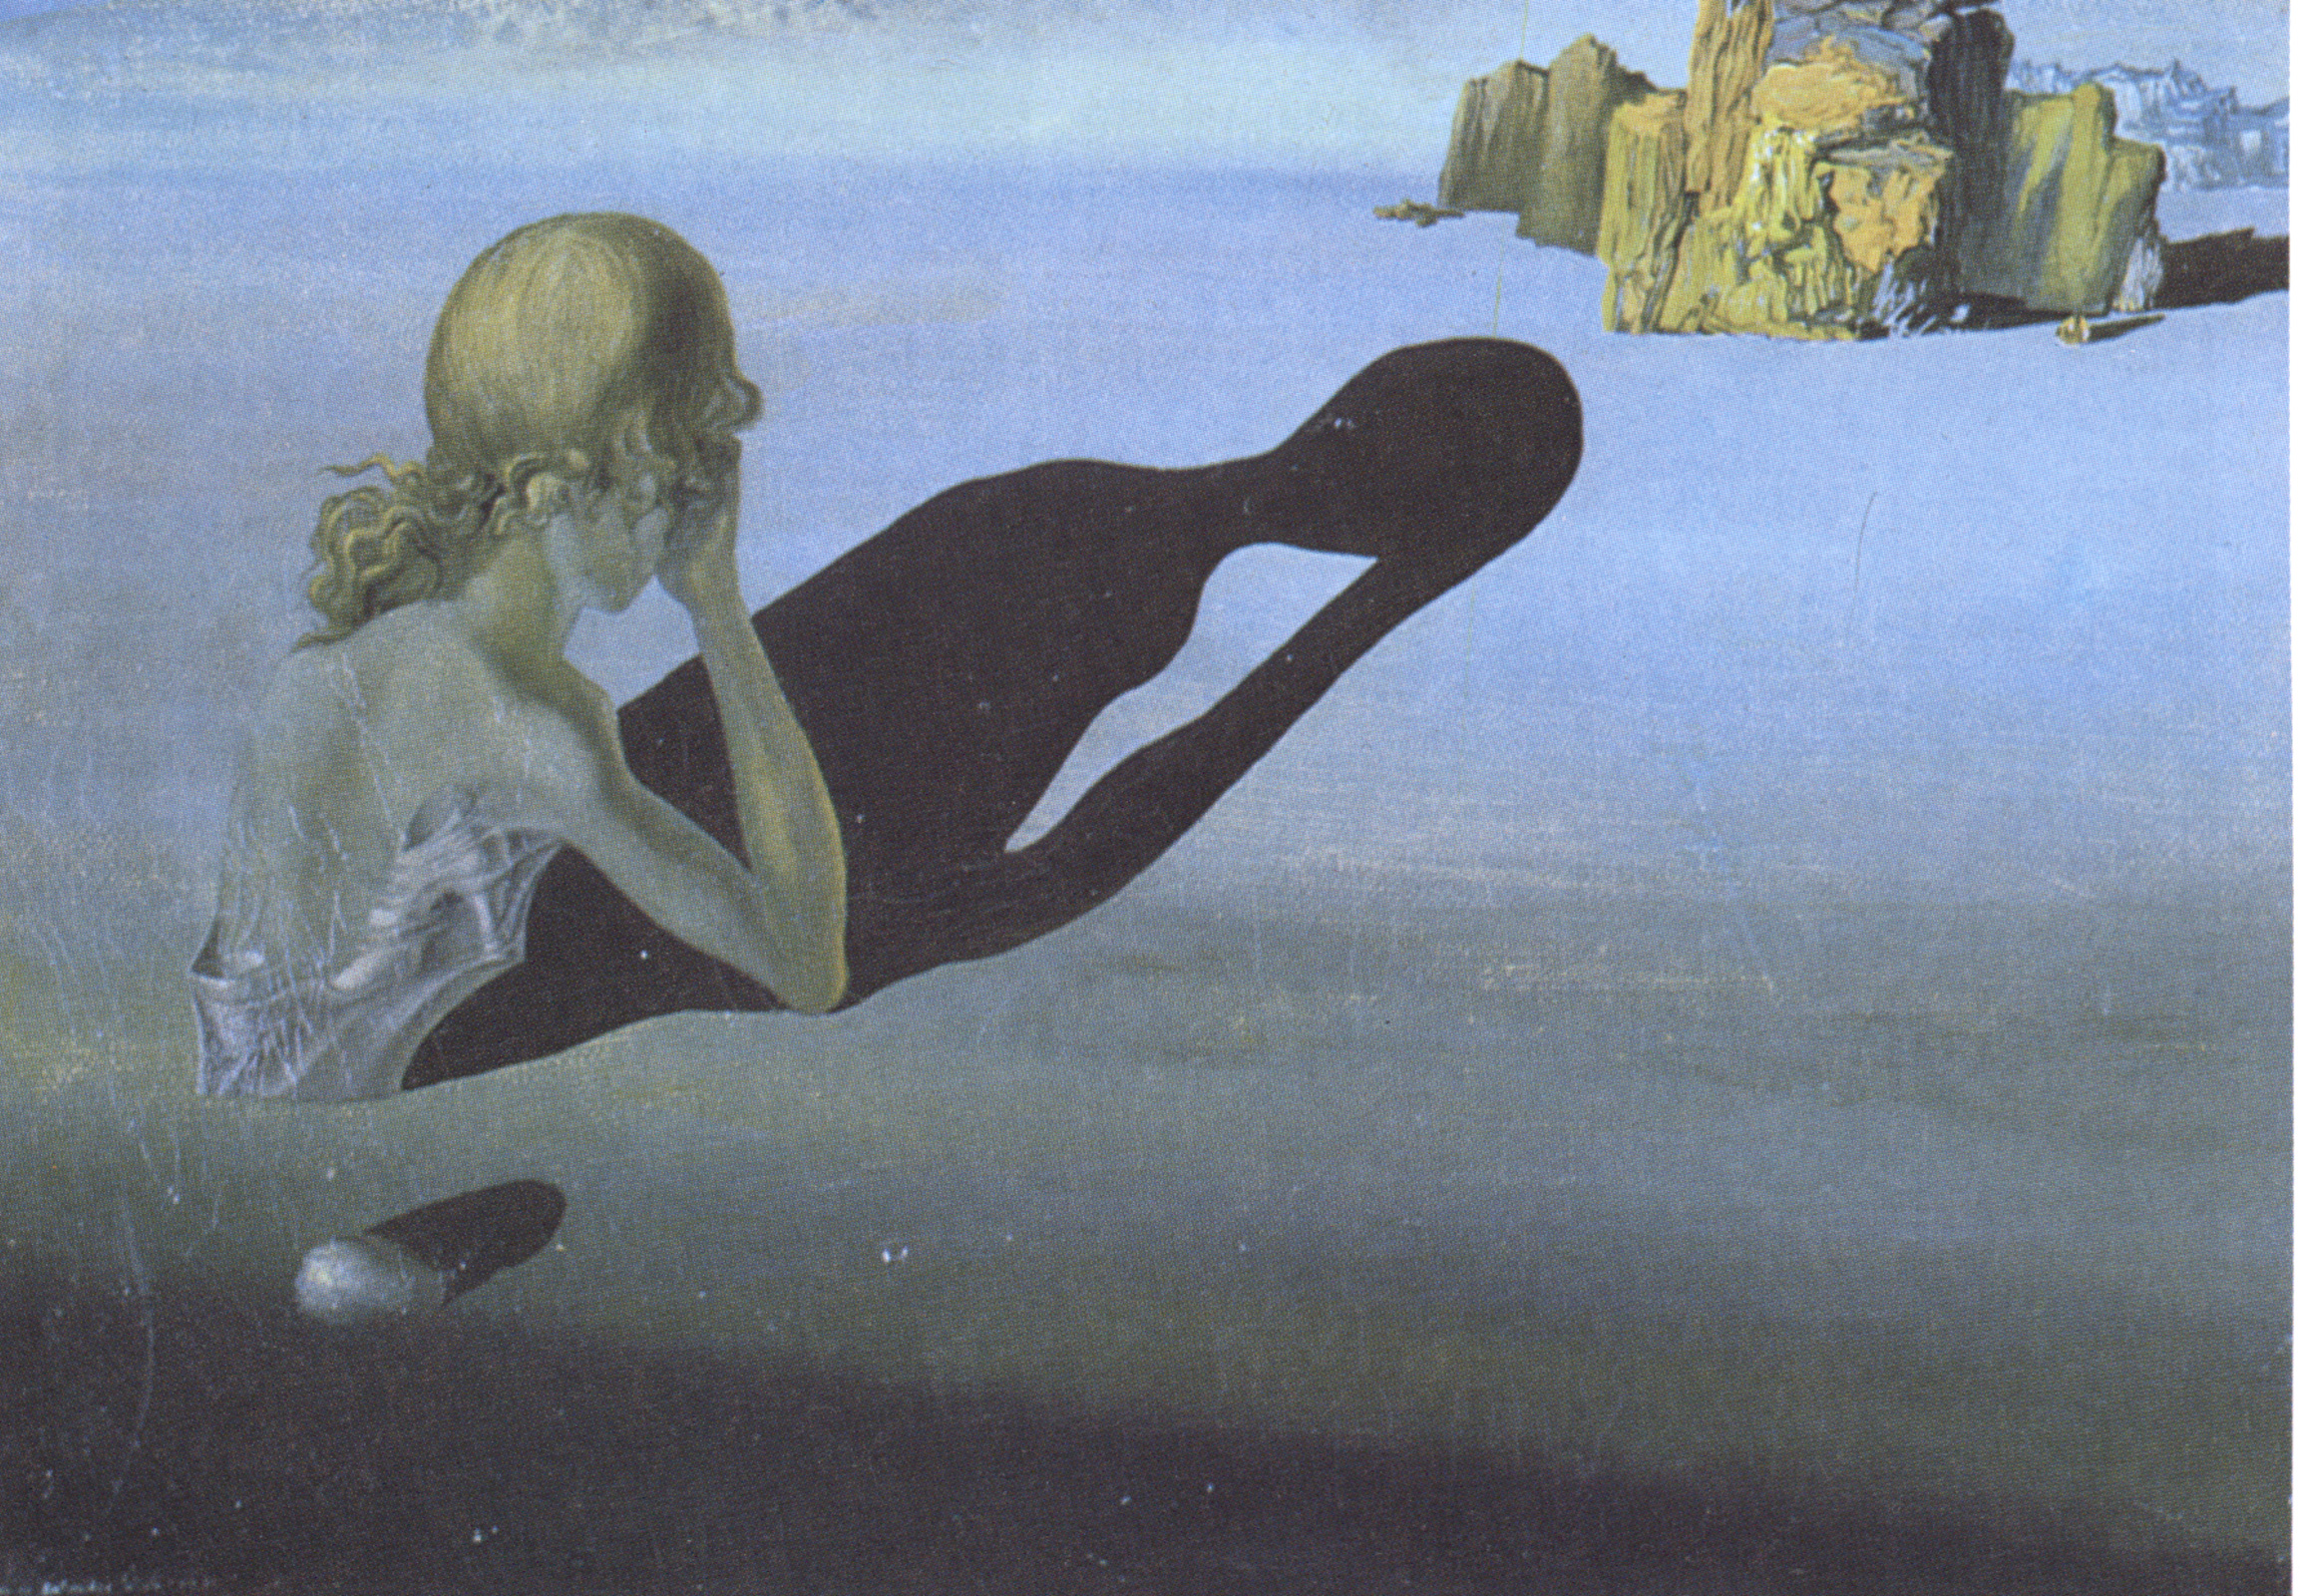 Remorse, or Sphinx Embedded in the Sand (1931).